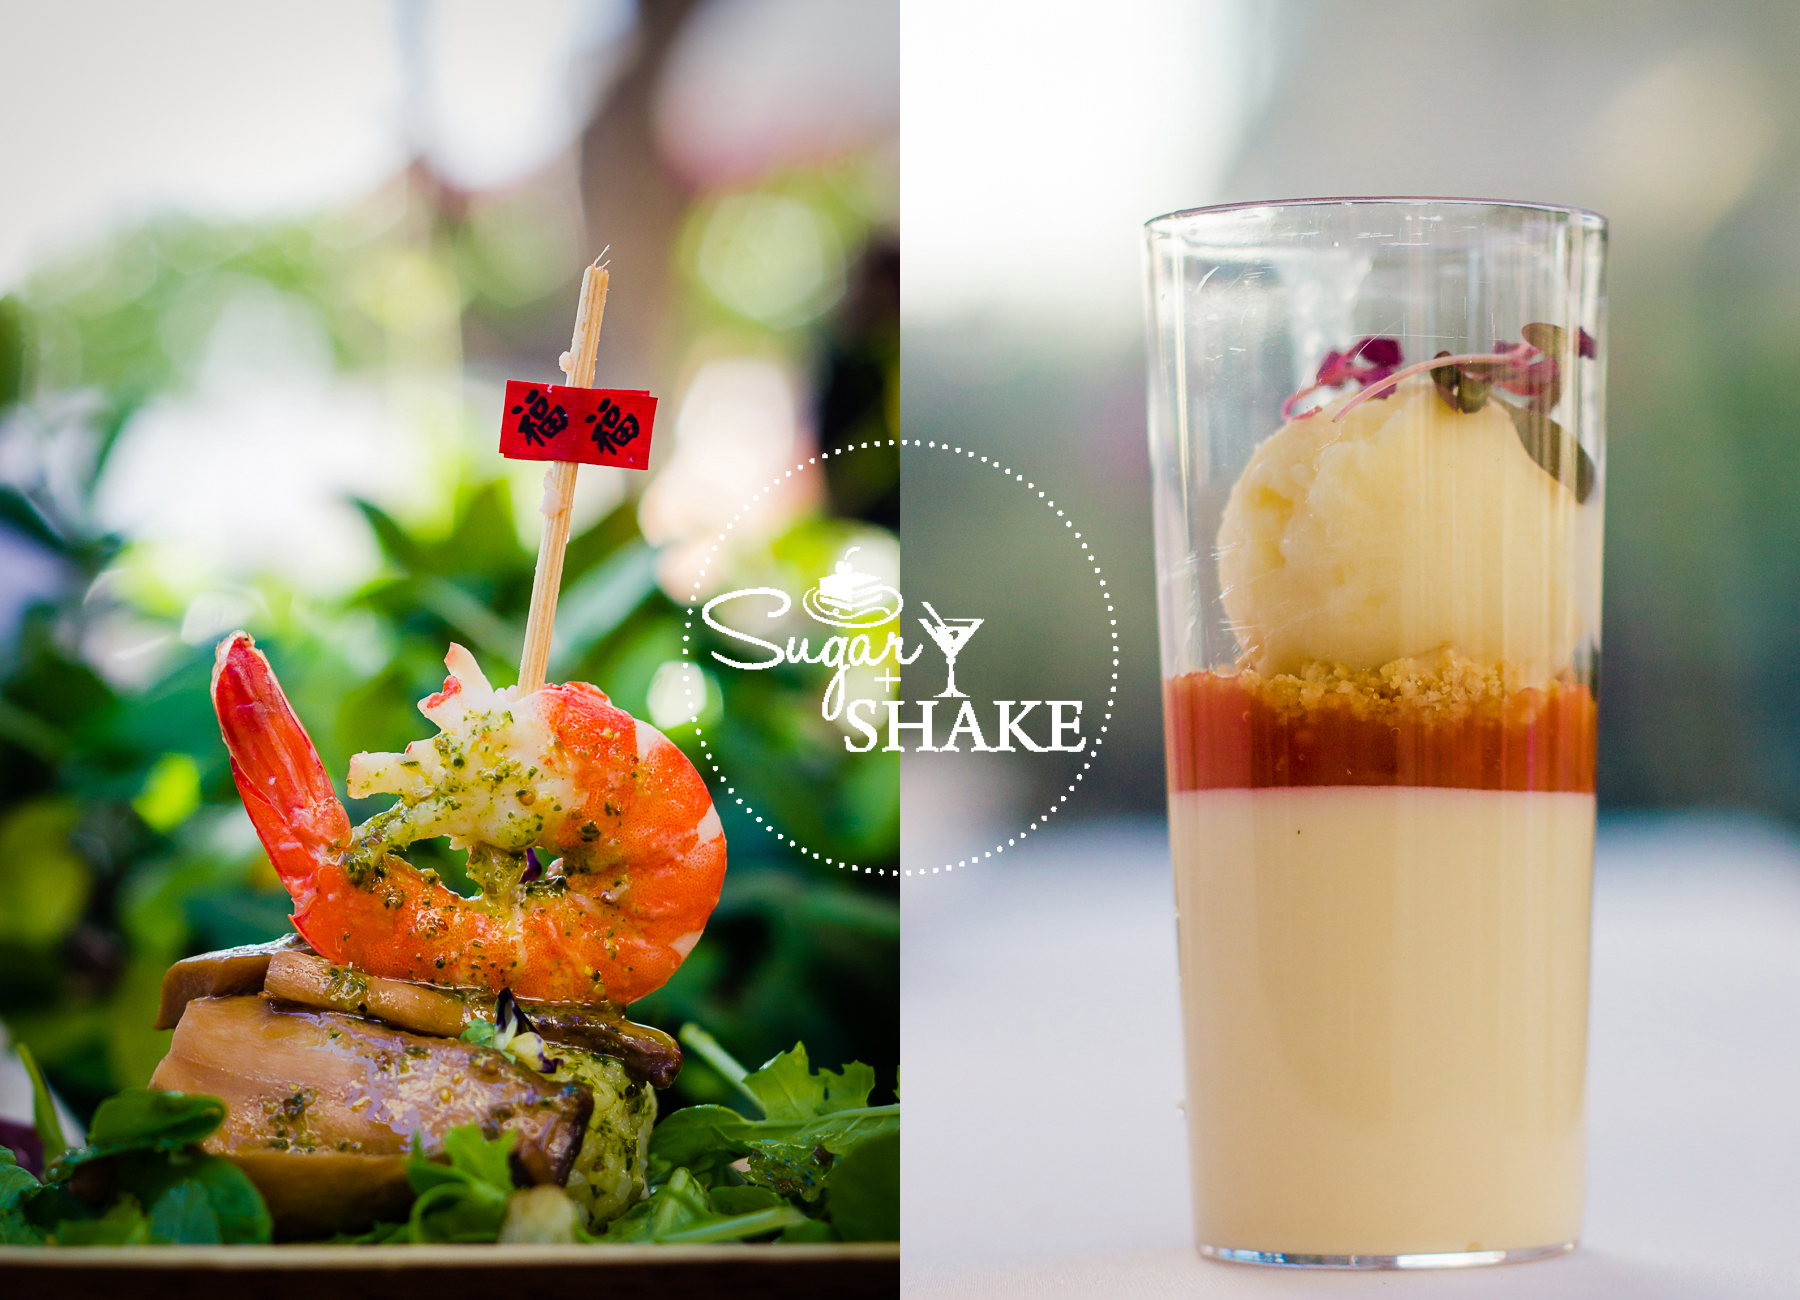 Previews from the Hawai‘i Food & Wine Festival. From the Under the Modern Moon: Morimoto & Friends event— “Shrimp Cocktail” by Amber Lin; Macadamia Nut Honey Mousse by Stephen Durfee. © 2013 Sugar + Shake